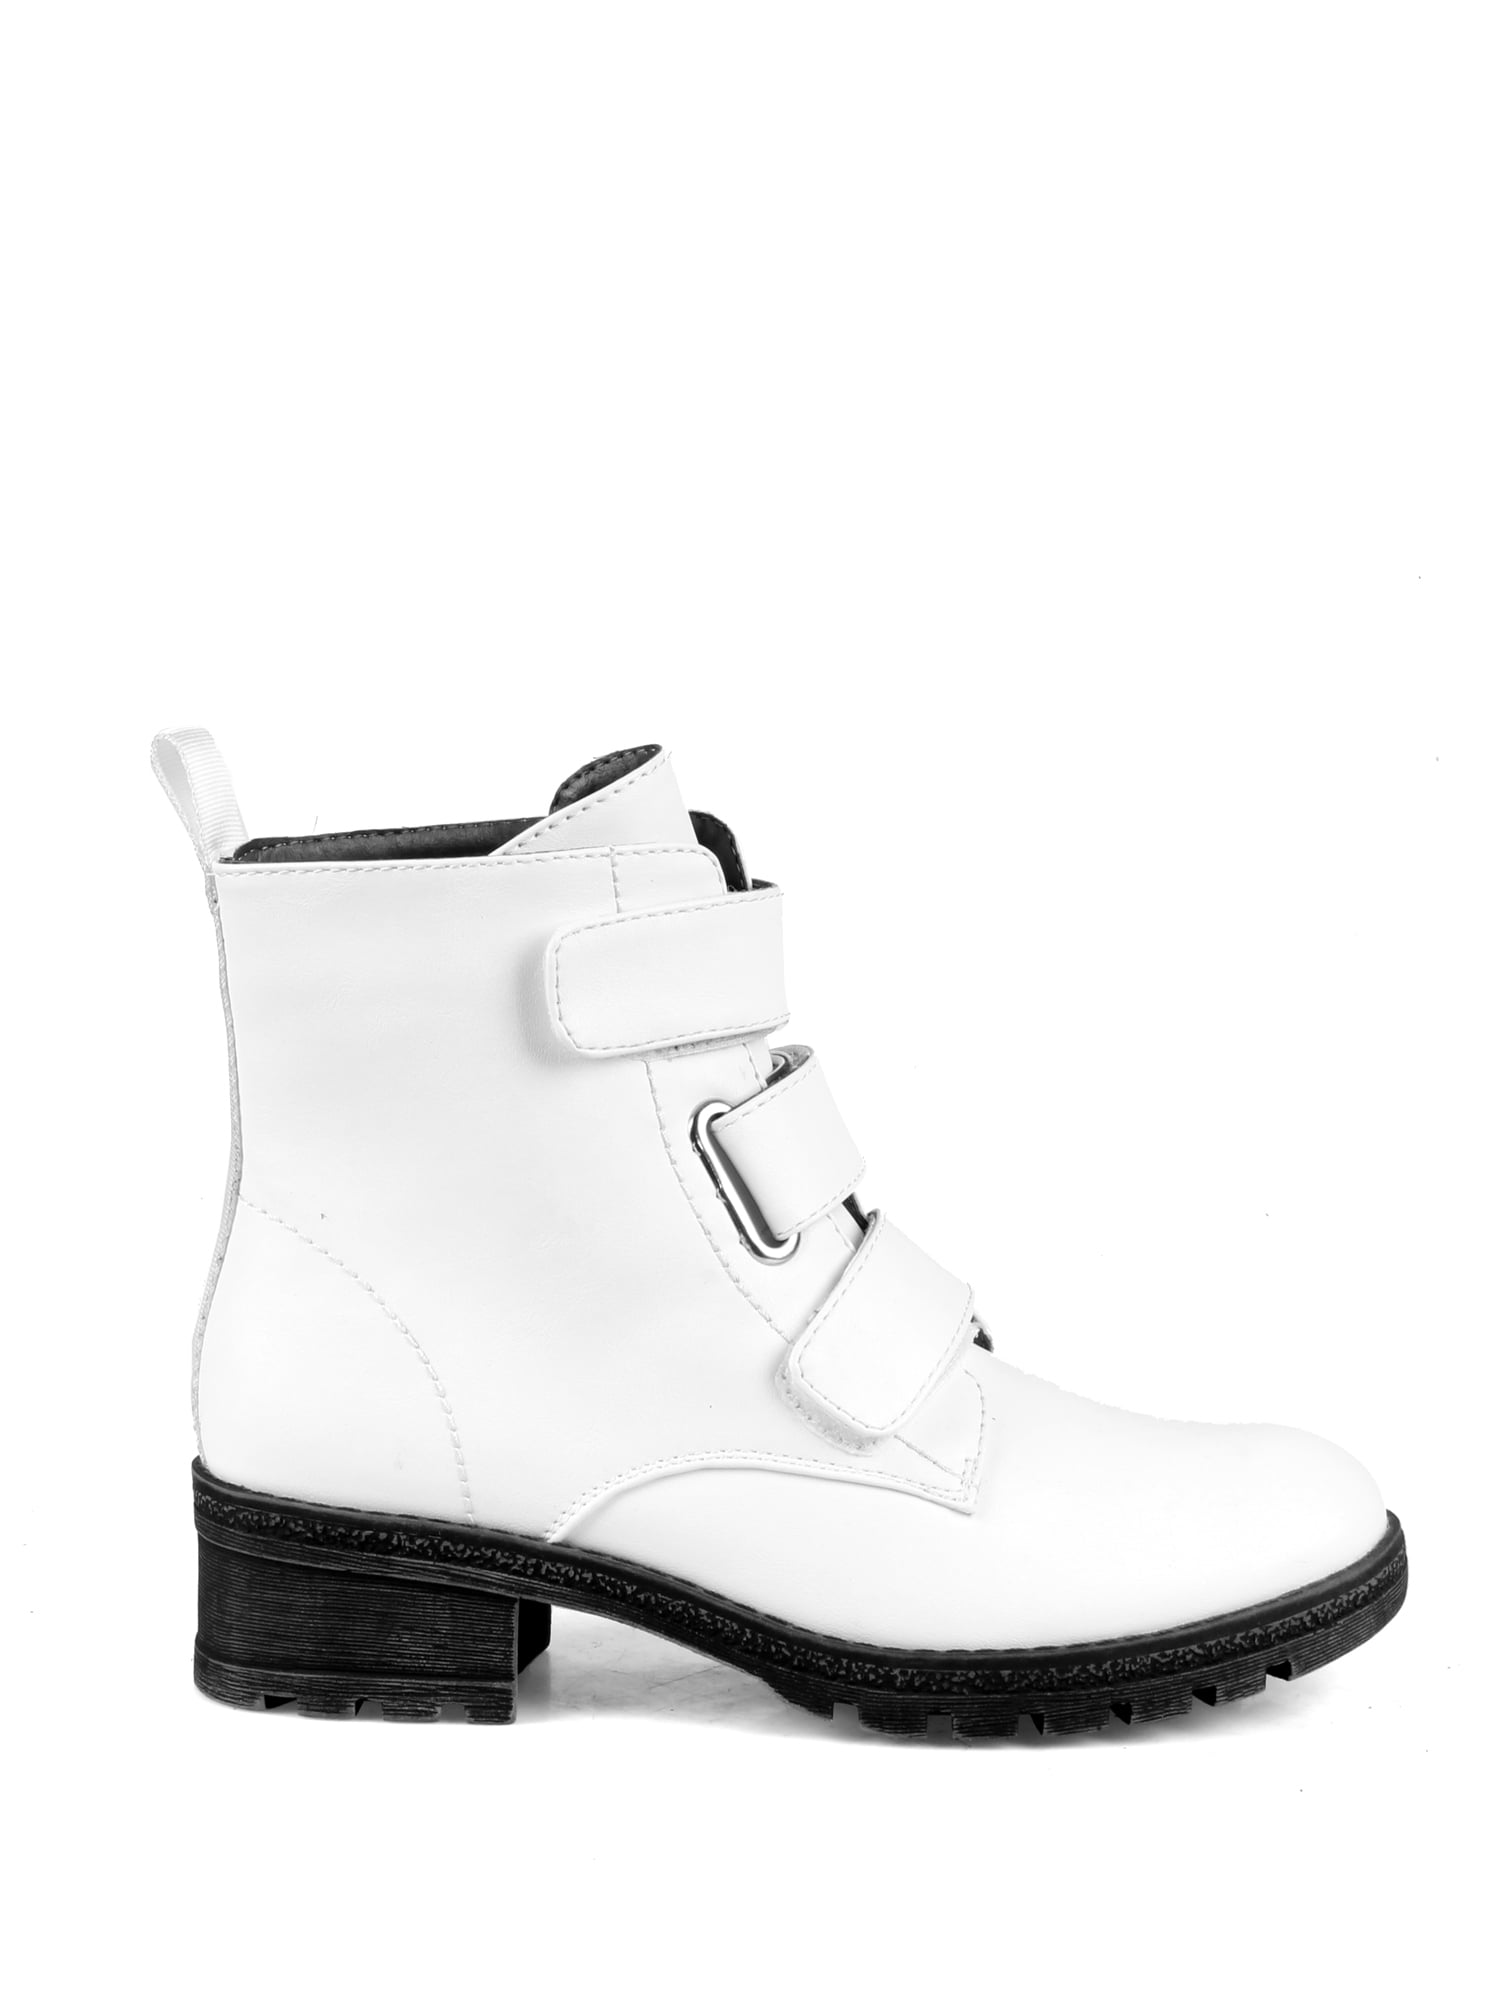 Anthony Wang Mid Calf Women's Combat Boots in White - Walmart.com